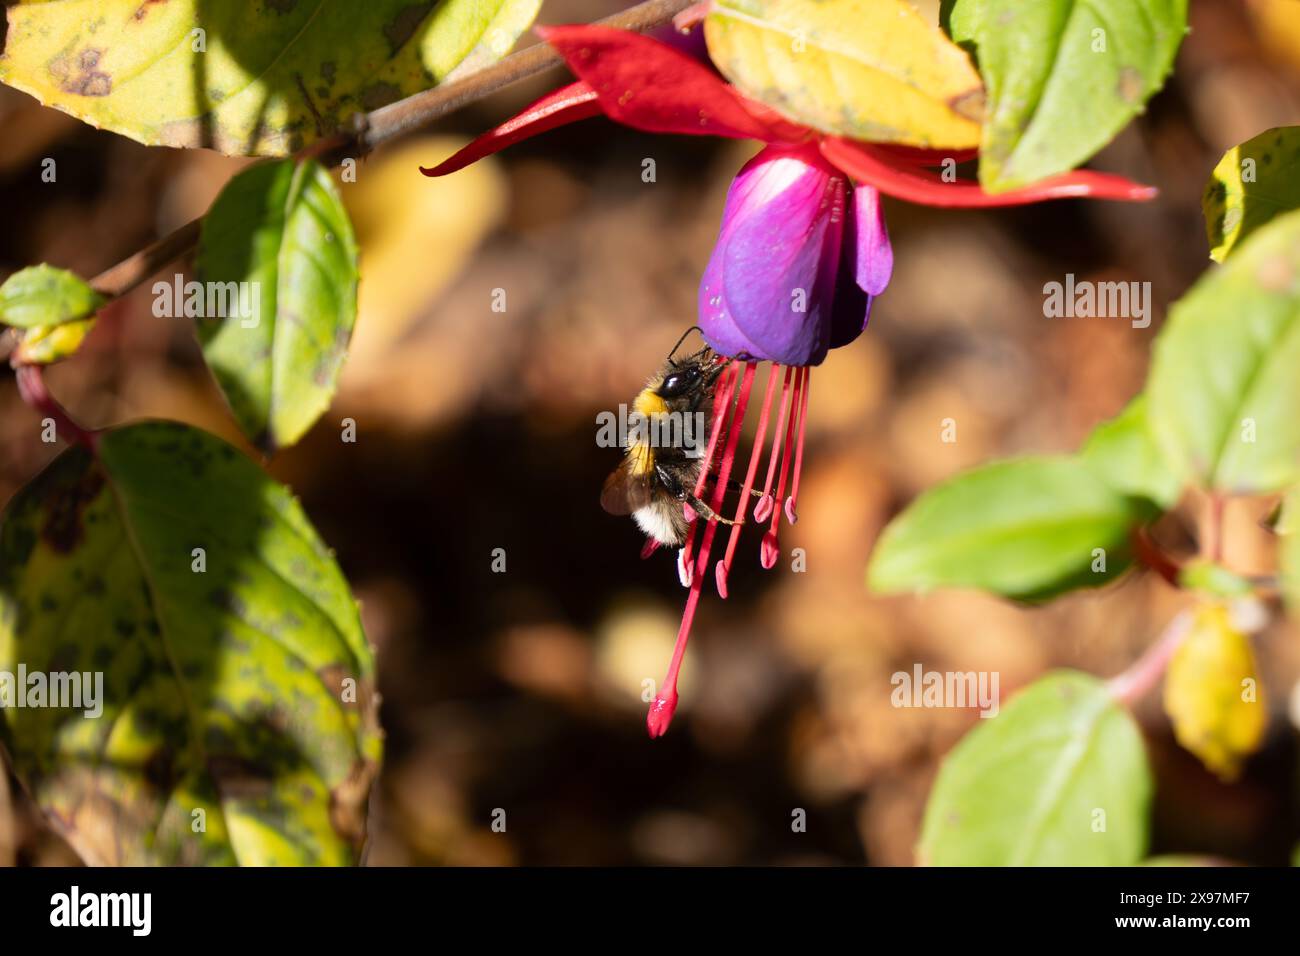 Bumblebee on stamen of fuchsia flower, framed by foliage.  Bumblebees are an important pollinator for home and commercial gardens. Horizontal format. Stock Photo